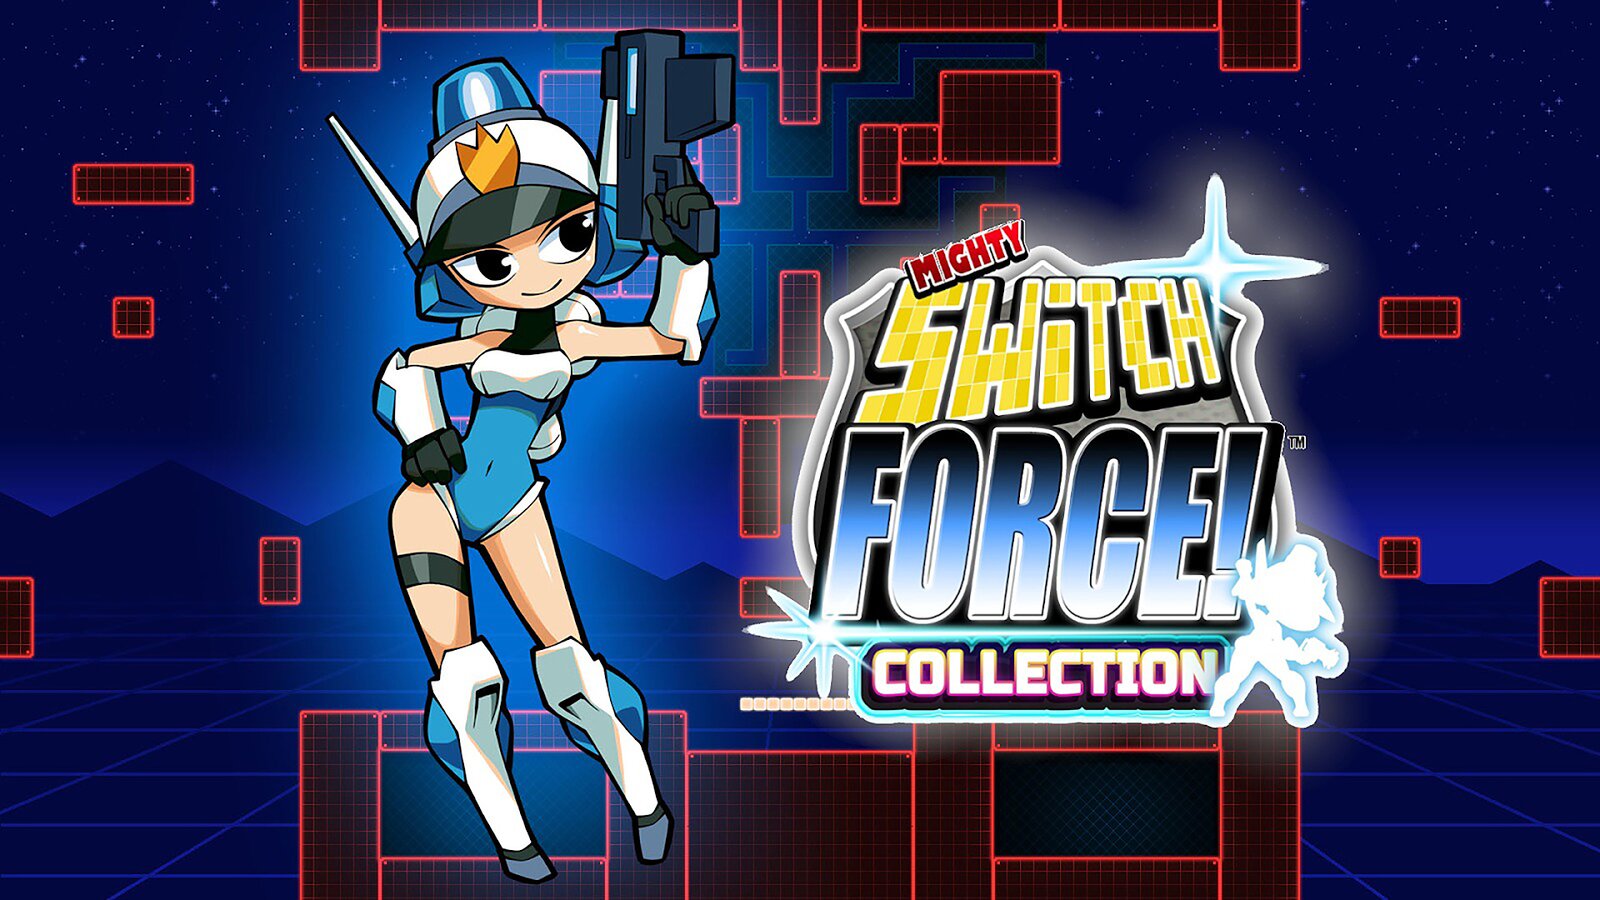 Mighty Switch Force! Collection